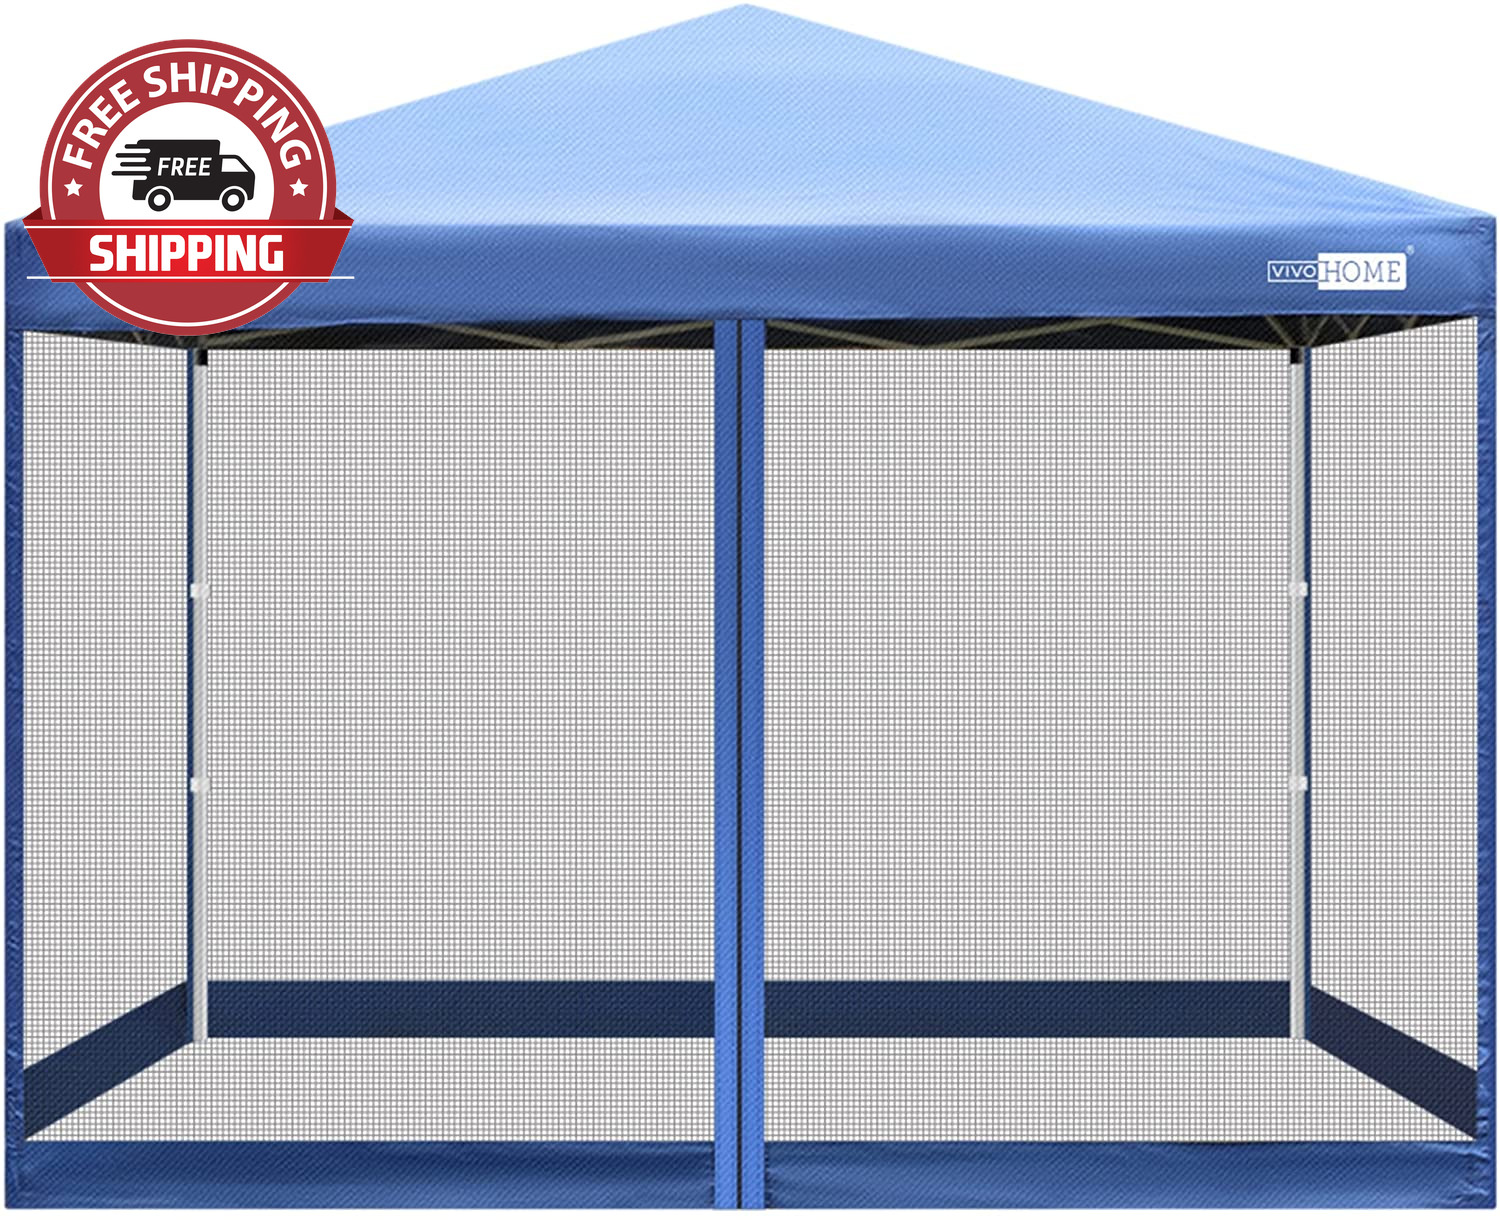 VIVOHOME 210D Oxford Outdoor Easy Pop up Canopy Screen Party Tent with Mesh Side